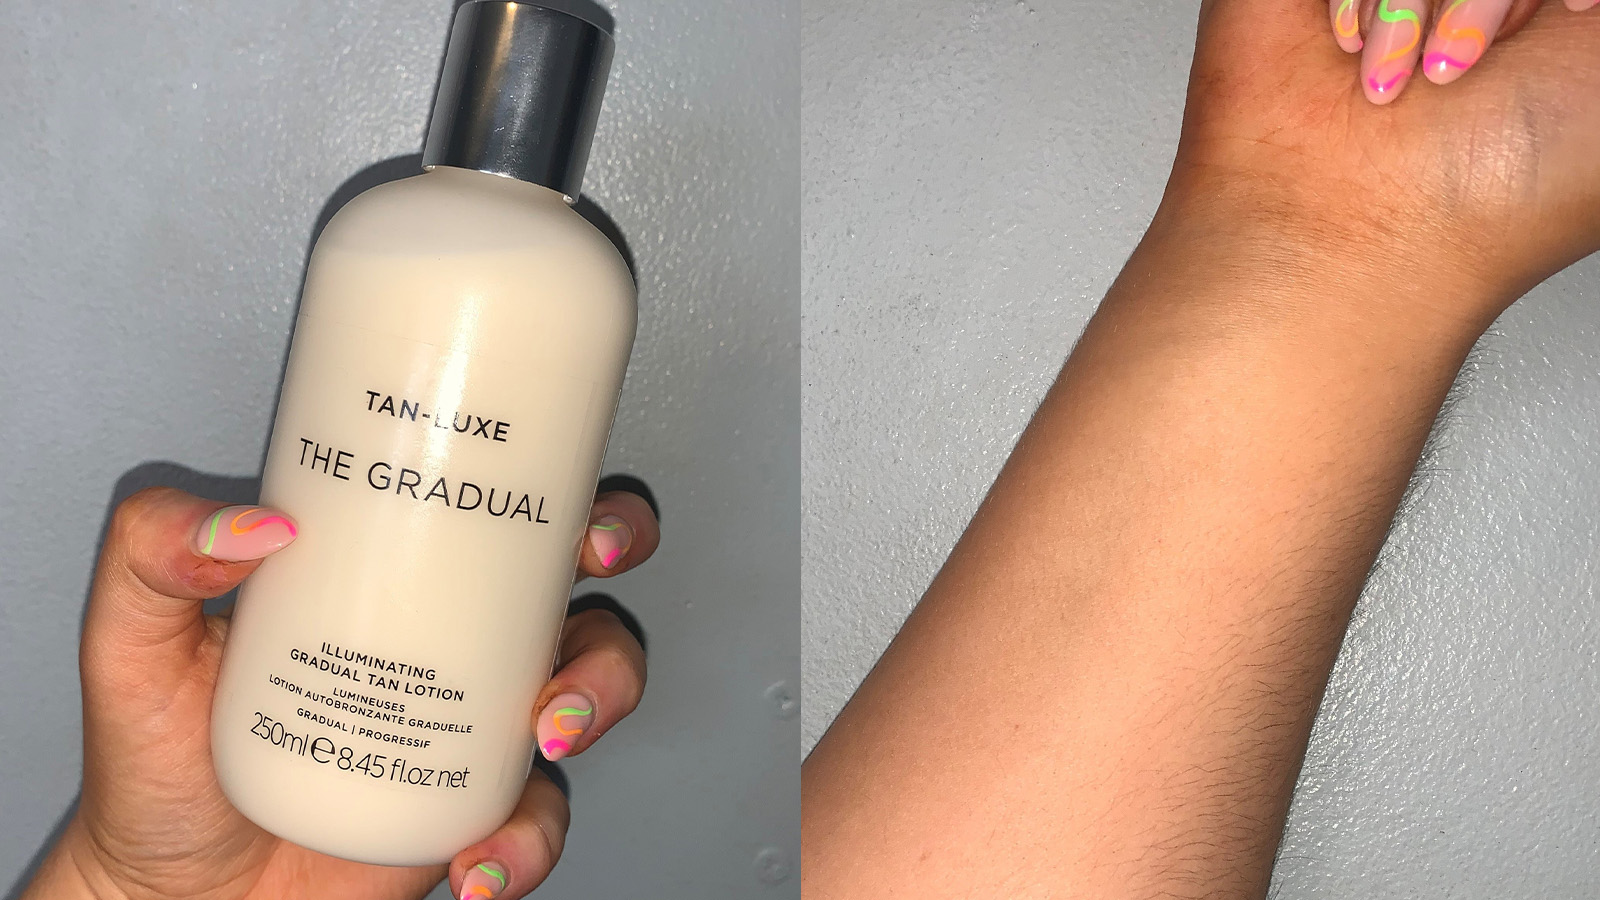 We're Obsessed This Gradual Tan - Beauty Bay Edited